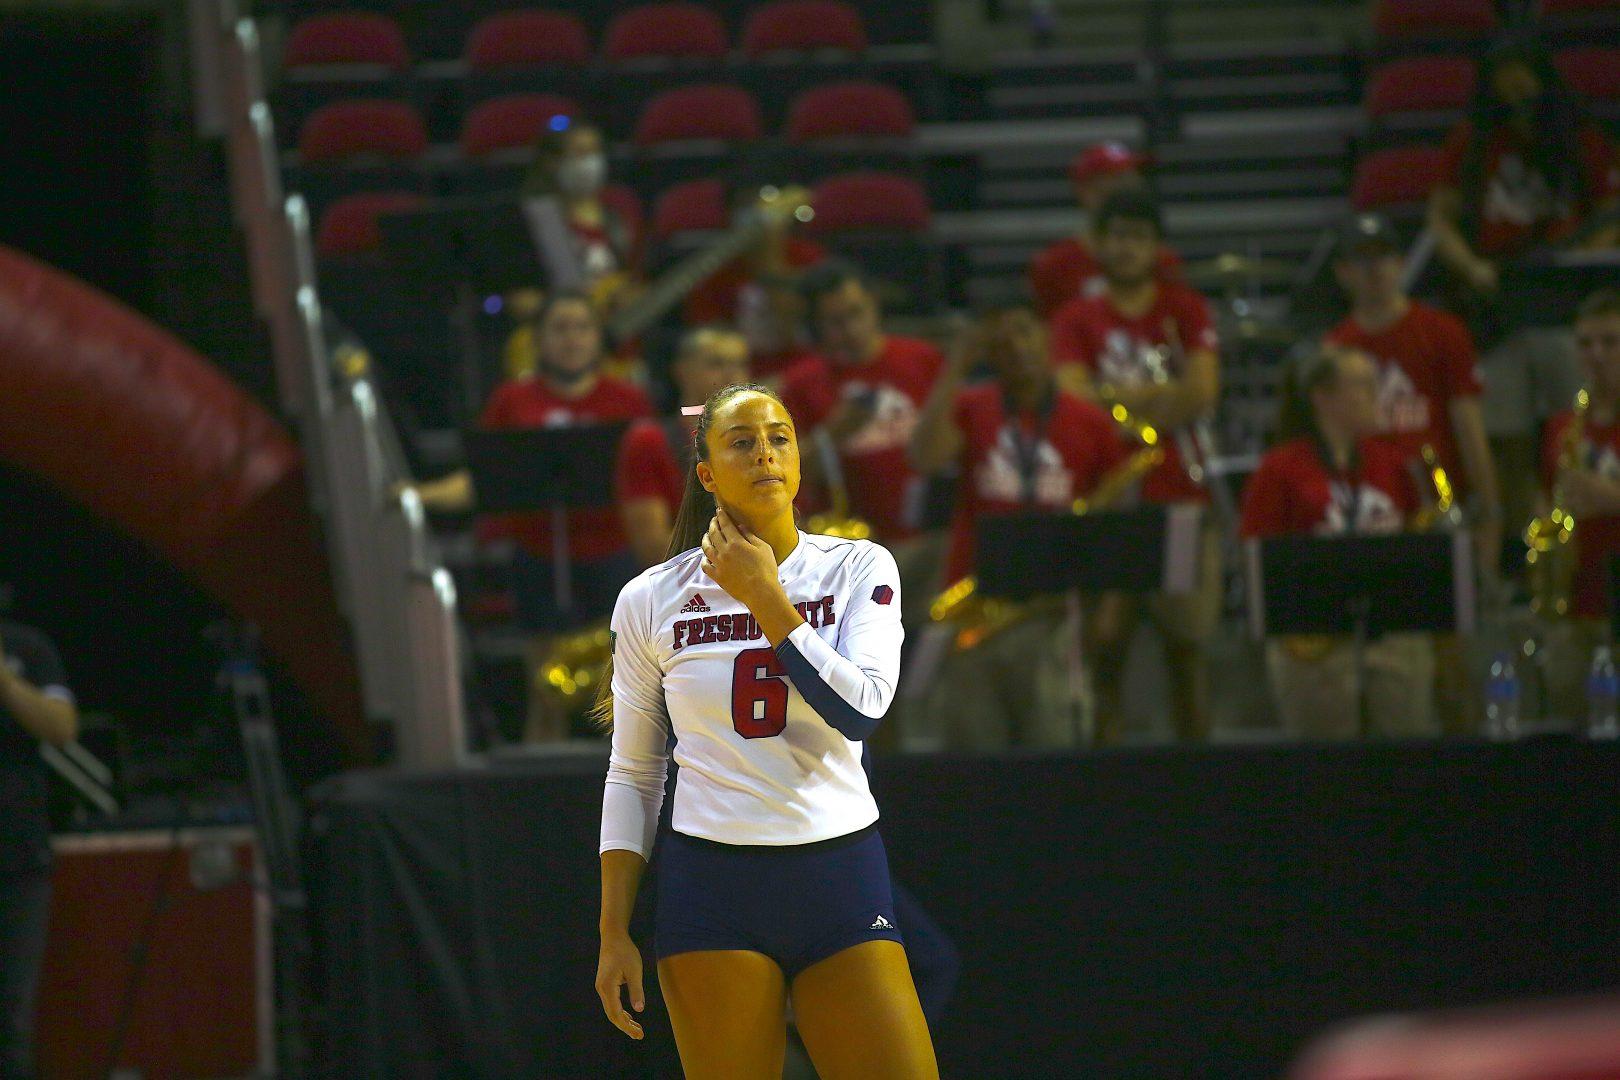 Fresno State offensive hitter Desiree Sukhov records 17 kills in game against Wyoming on Saturday, Oct. 2, 2021, at the Save Mart Center. (Wyatt Bible/The Collegian)